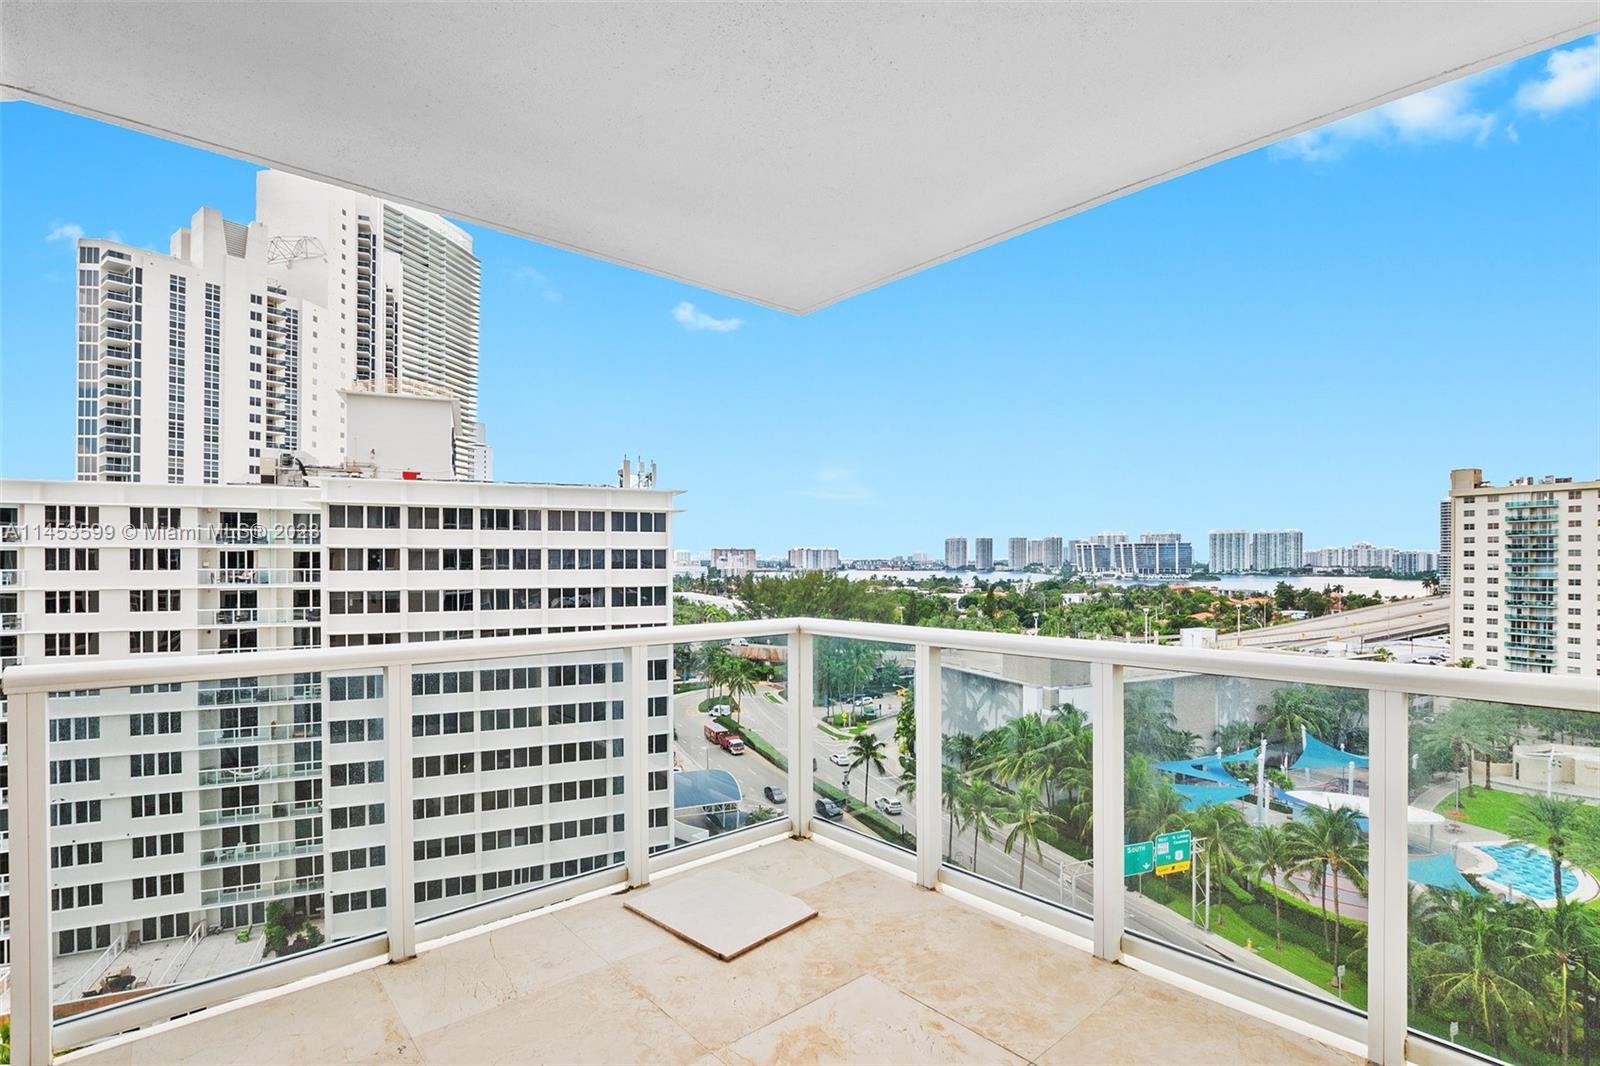 Fabulous 3 bdrm 4 full baths corner condo with the most spectacular sunset views in Sunny Isles Beach! 2,419 sq.ft per Ocean One plans! Large eat in kitchen, Great (living/dining) room surrounded by windows! One of the brightest apartments in the building! Master bedroom has his and hers walk in closets and bathroom, all bedrooms have en-suite facilities. Full service building with concierge, cafe, valet, gym, gym classes daily, beach service & more!